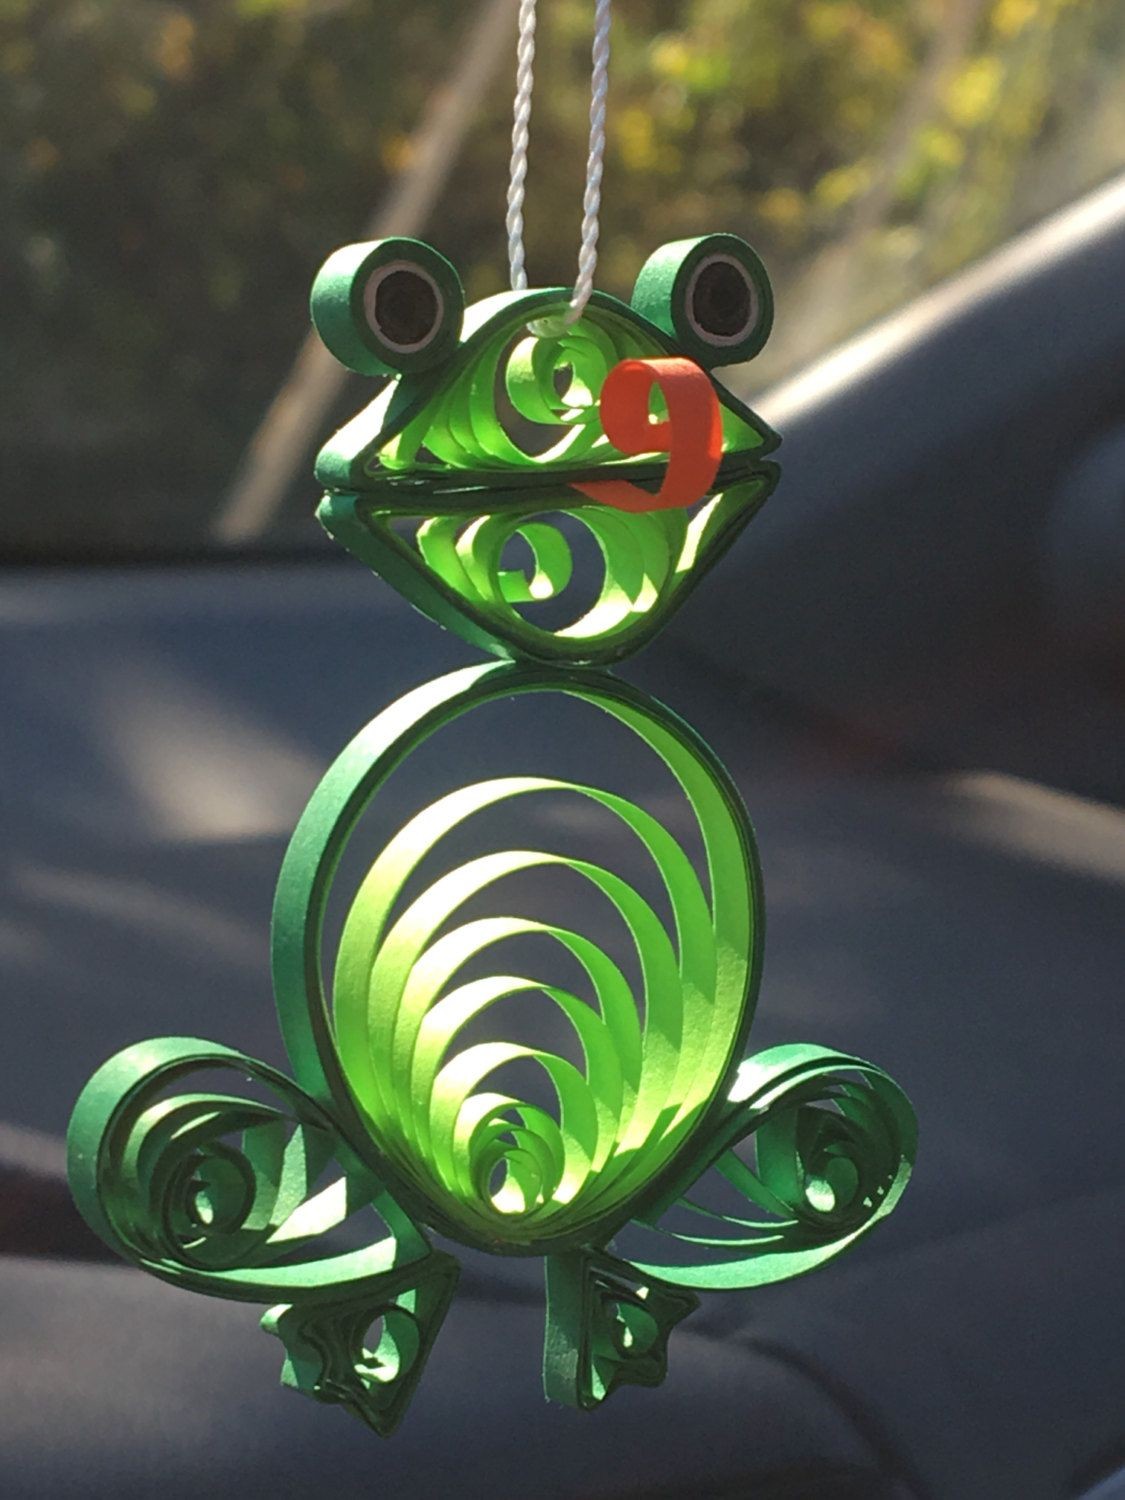 Frog Papercraft Quilled Christmas Paper Art ornament Ribbet the Frog by thequillery